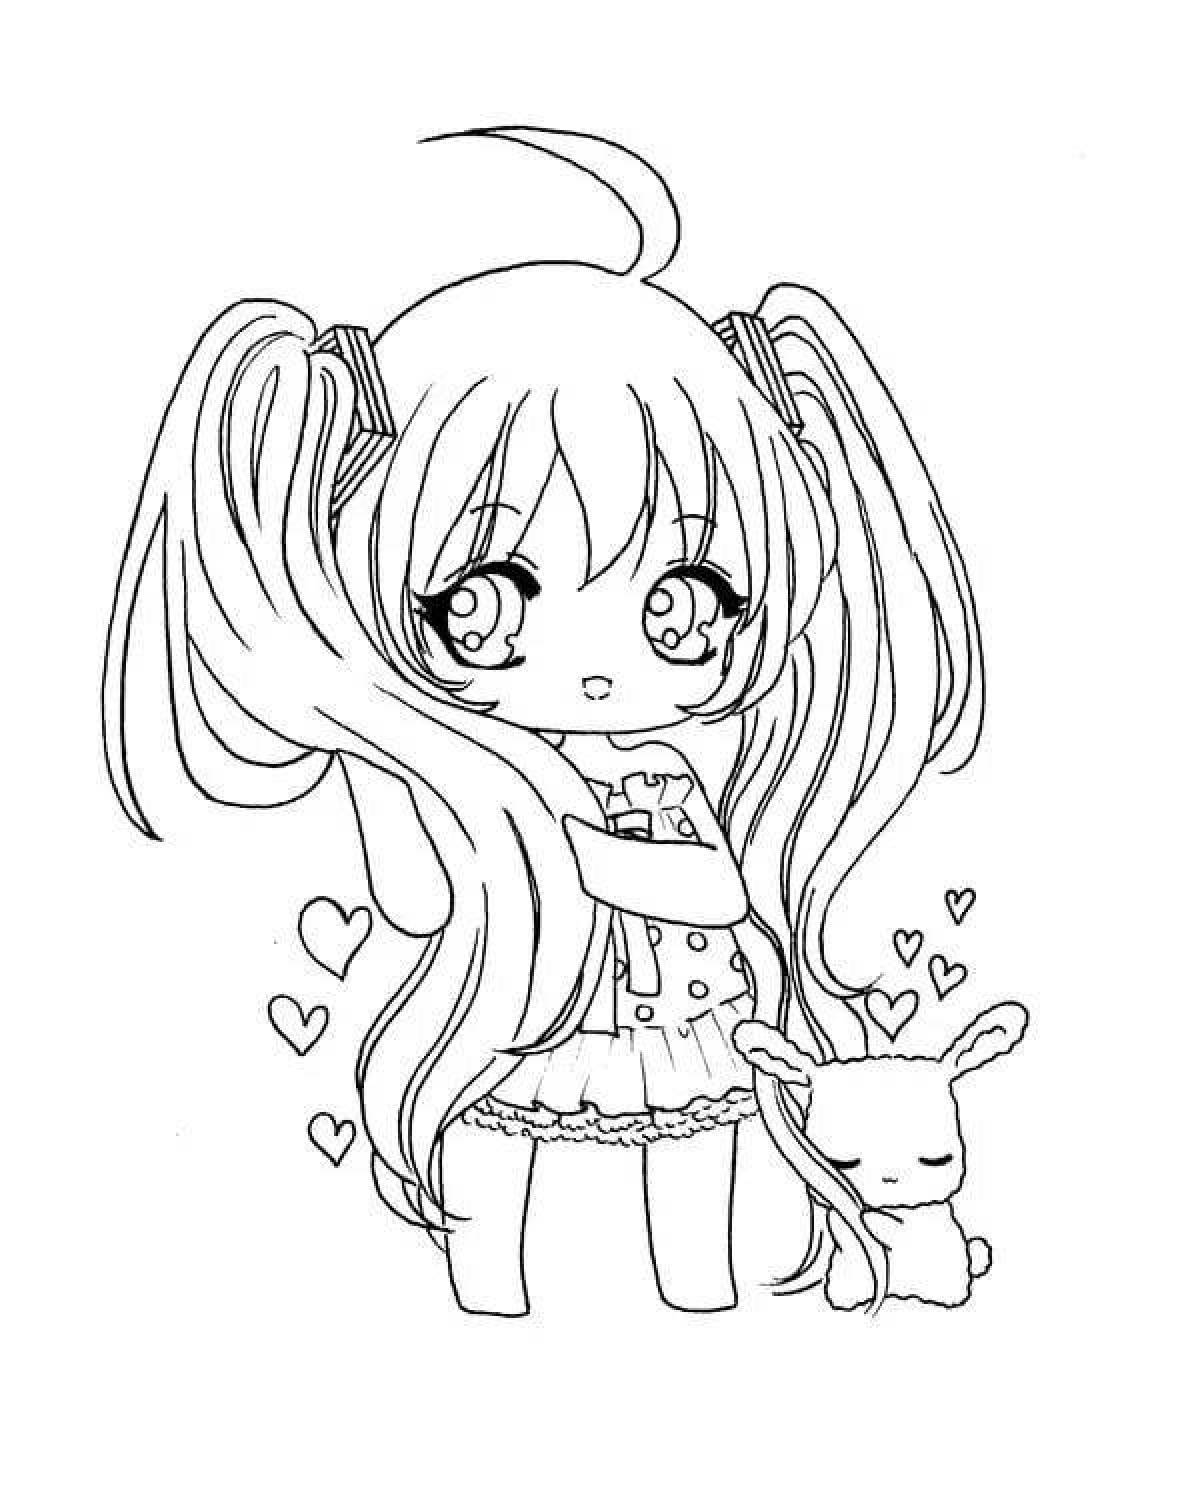 Amazing coloring pages for cute anime girls